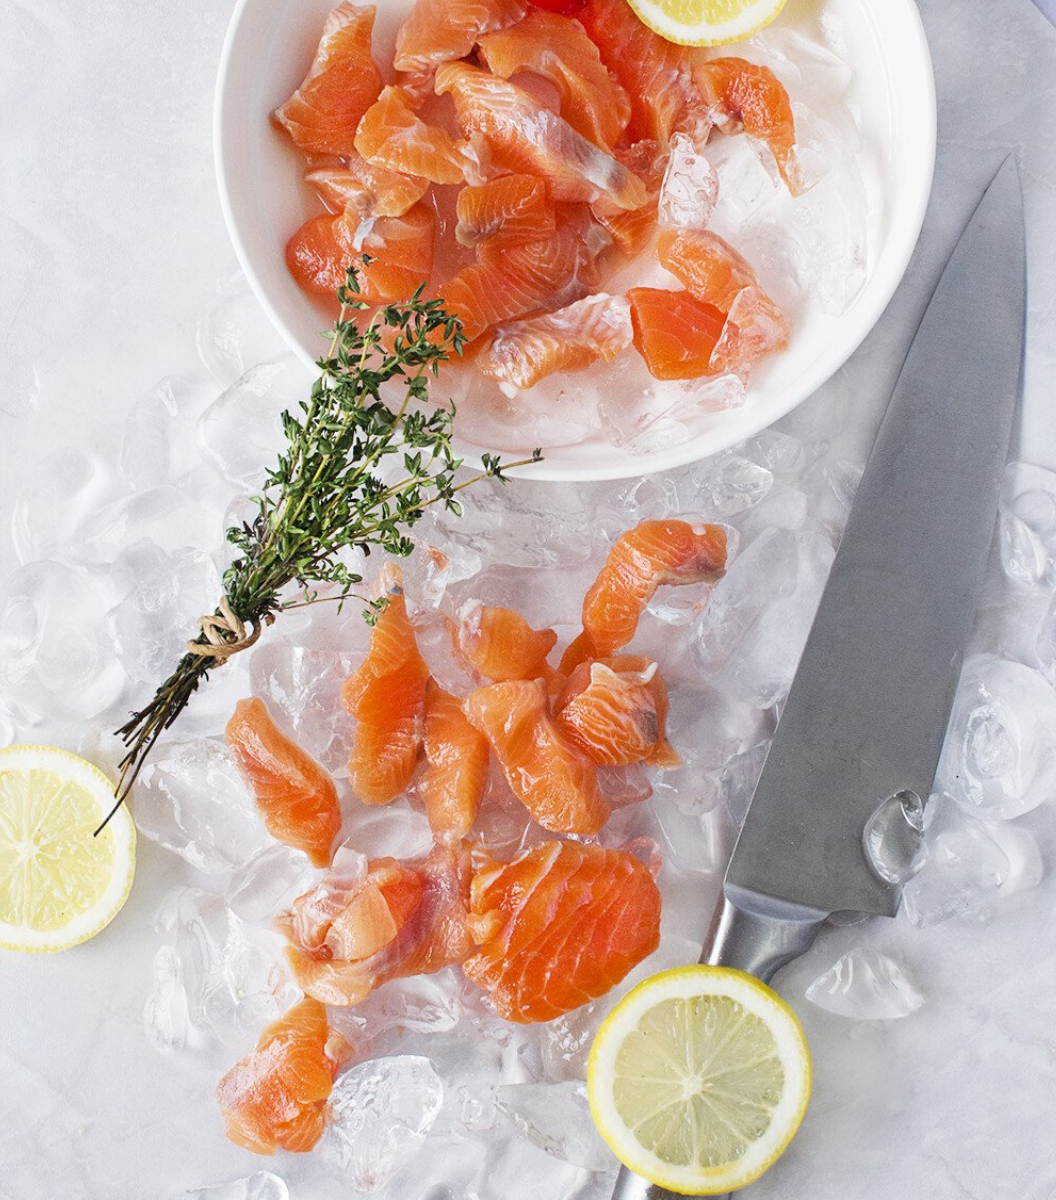 Fresh Mt. Cook Alpine New Zealand Salmon Pieces with ice cube, lemon slices and a japanese white steel knife by aside